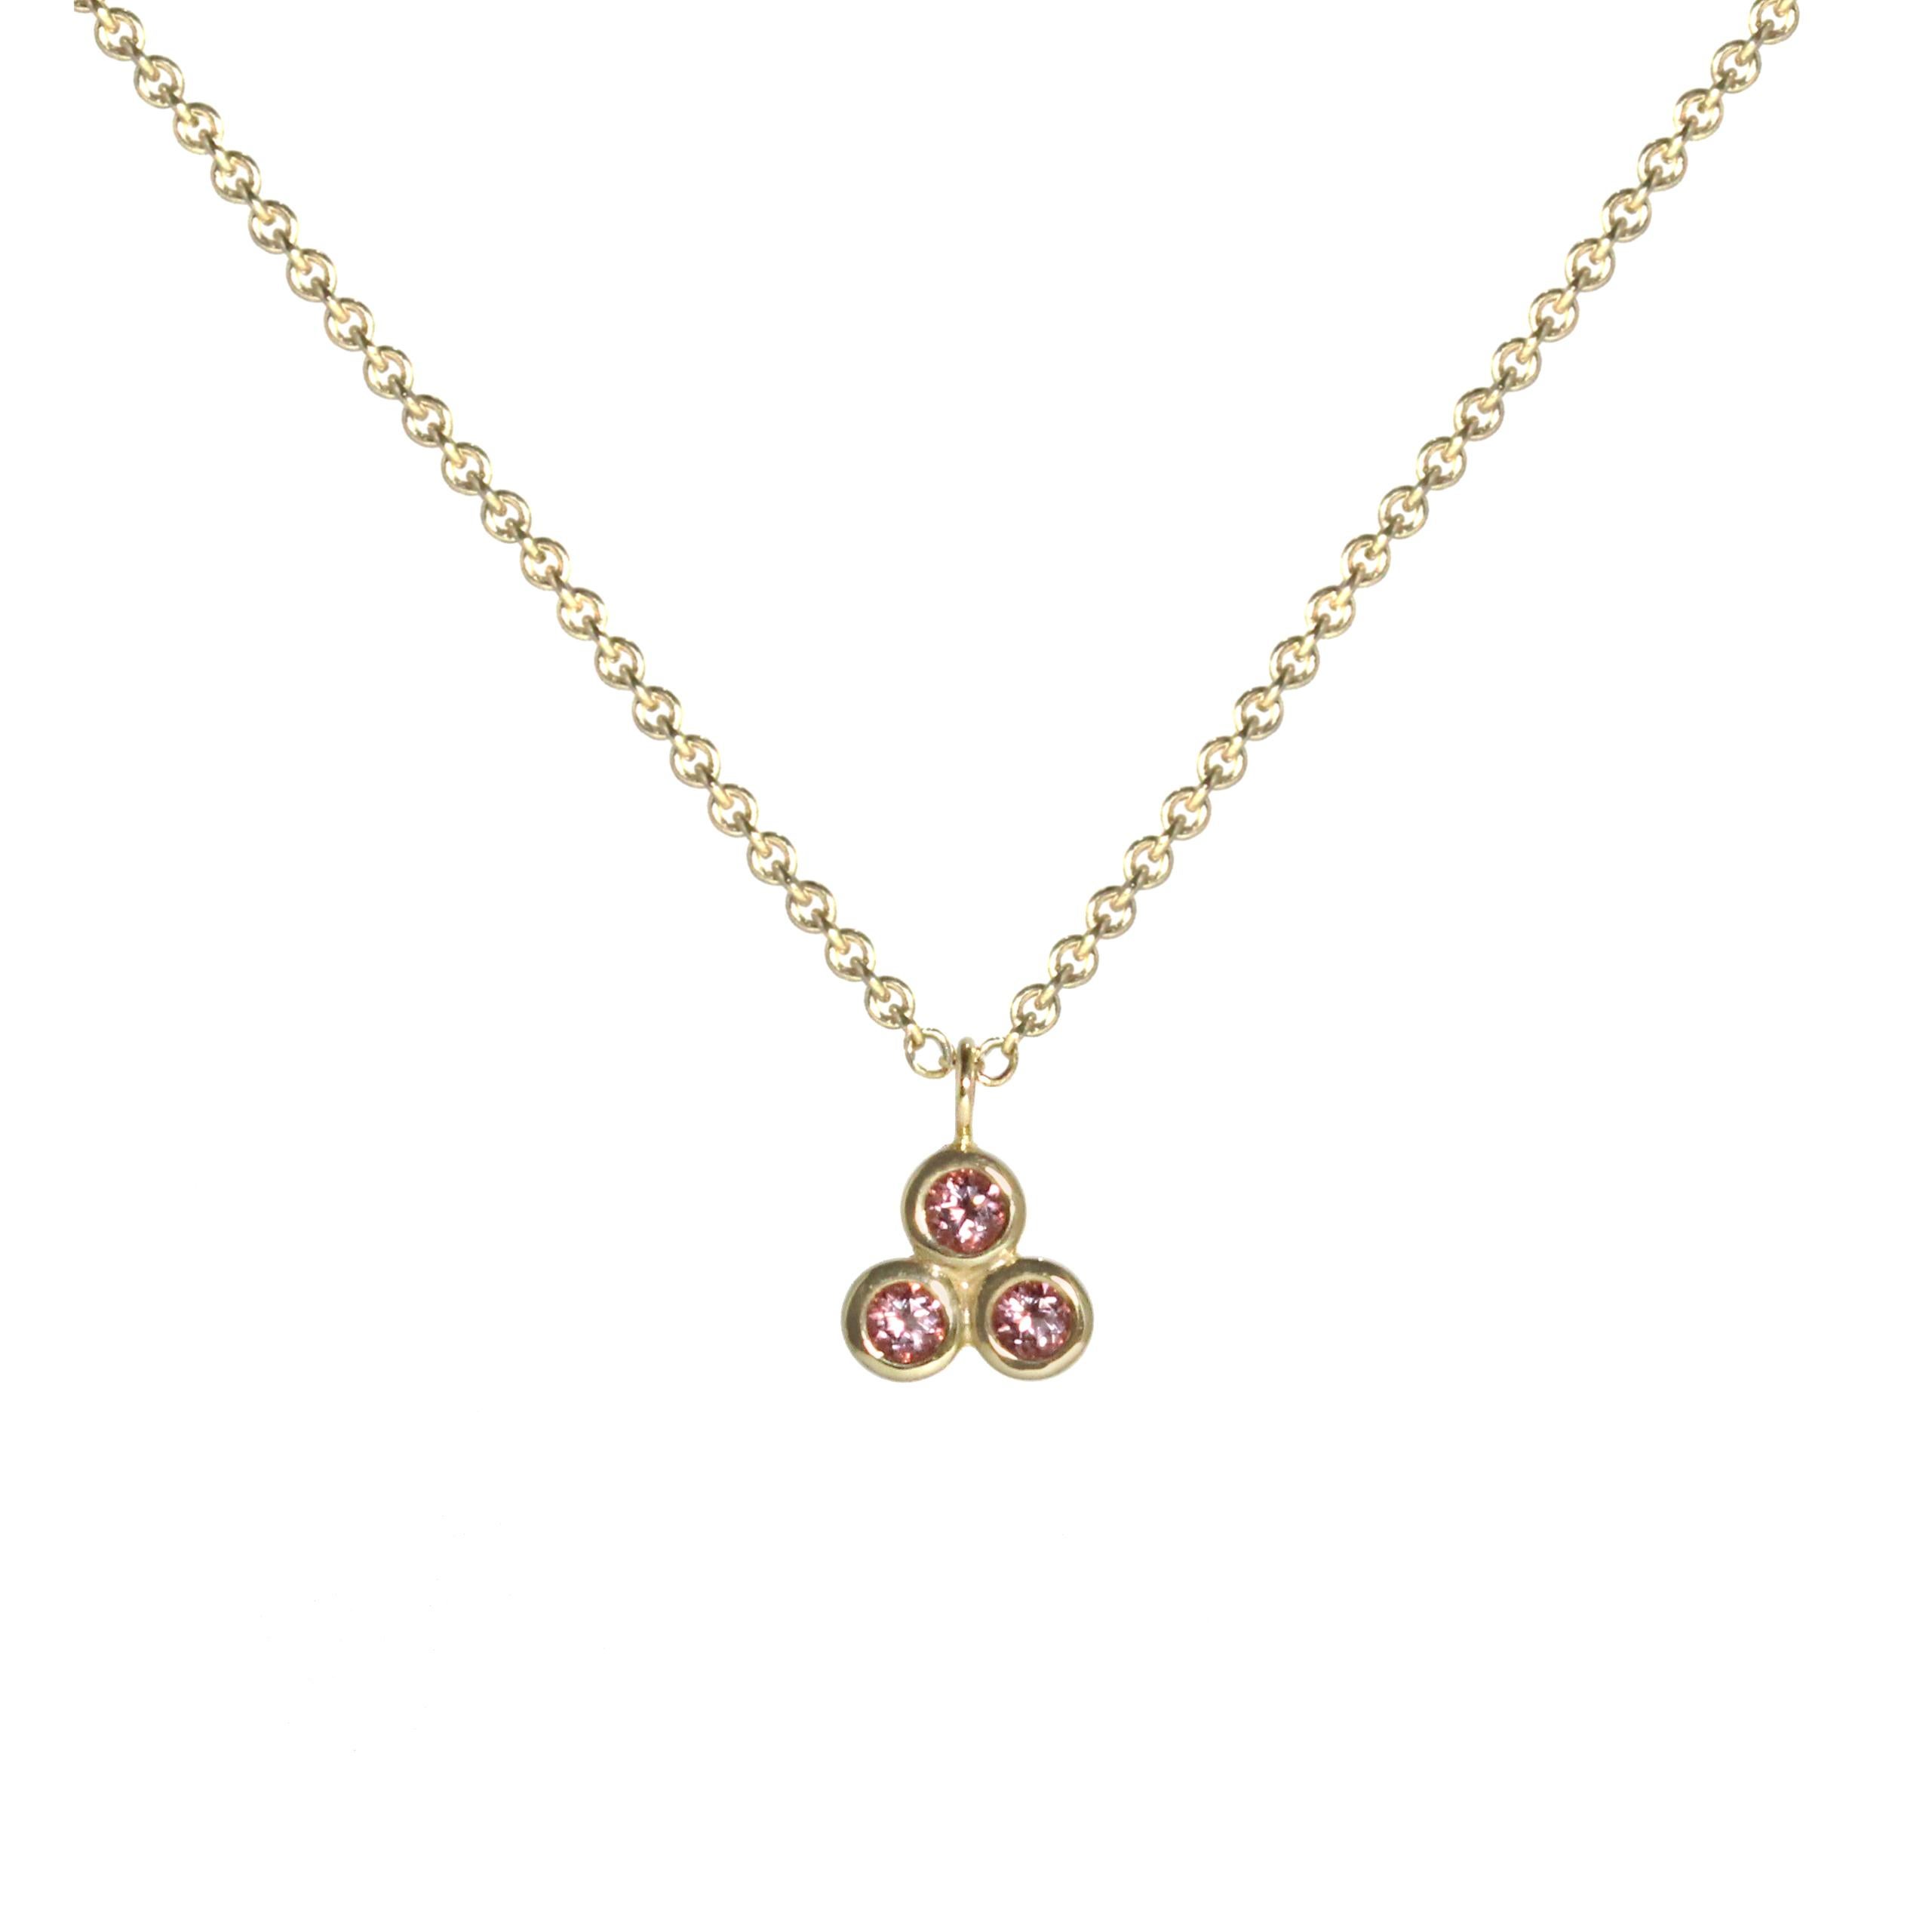 Emily Kuvin Gold and Pink Topaz Dainty Necklace